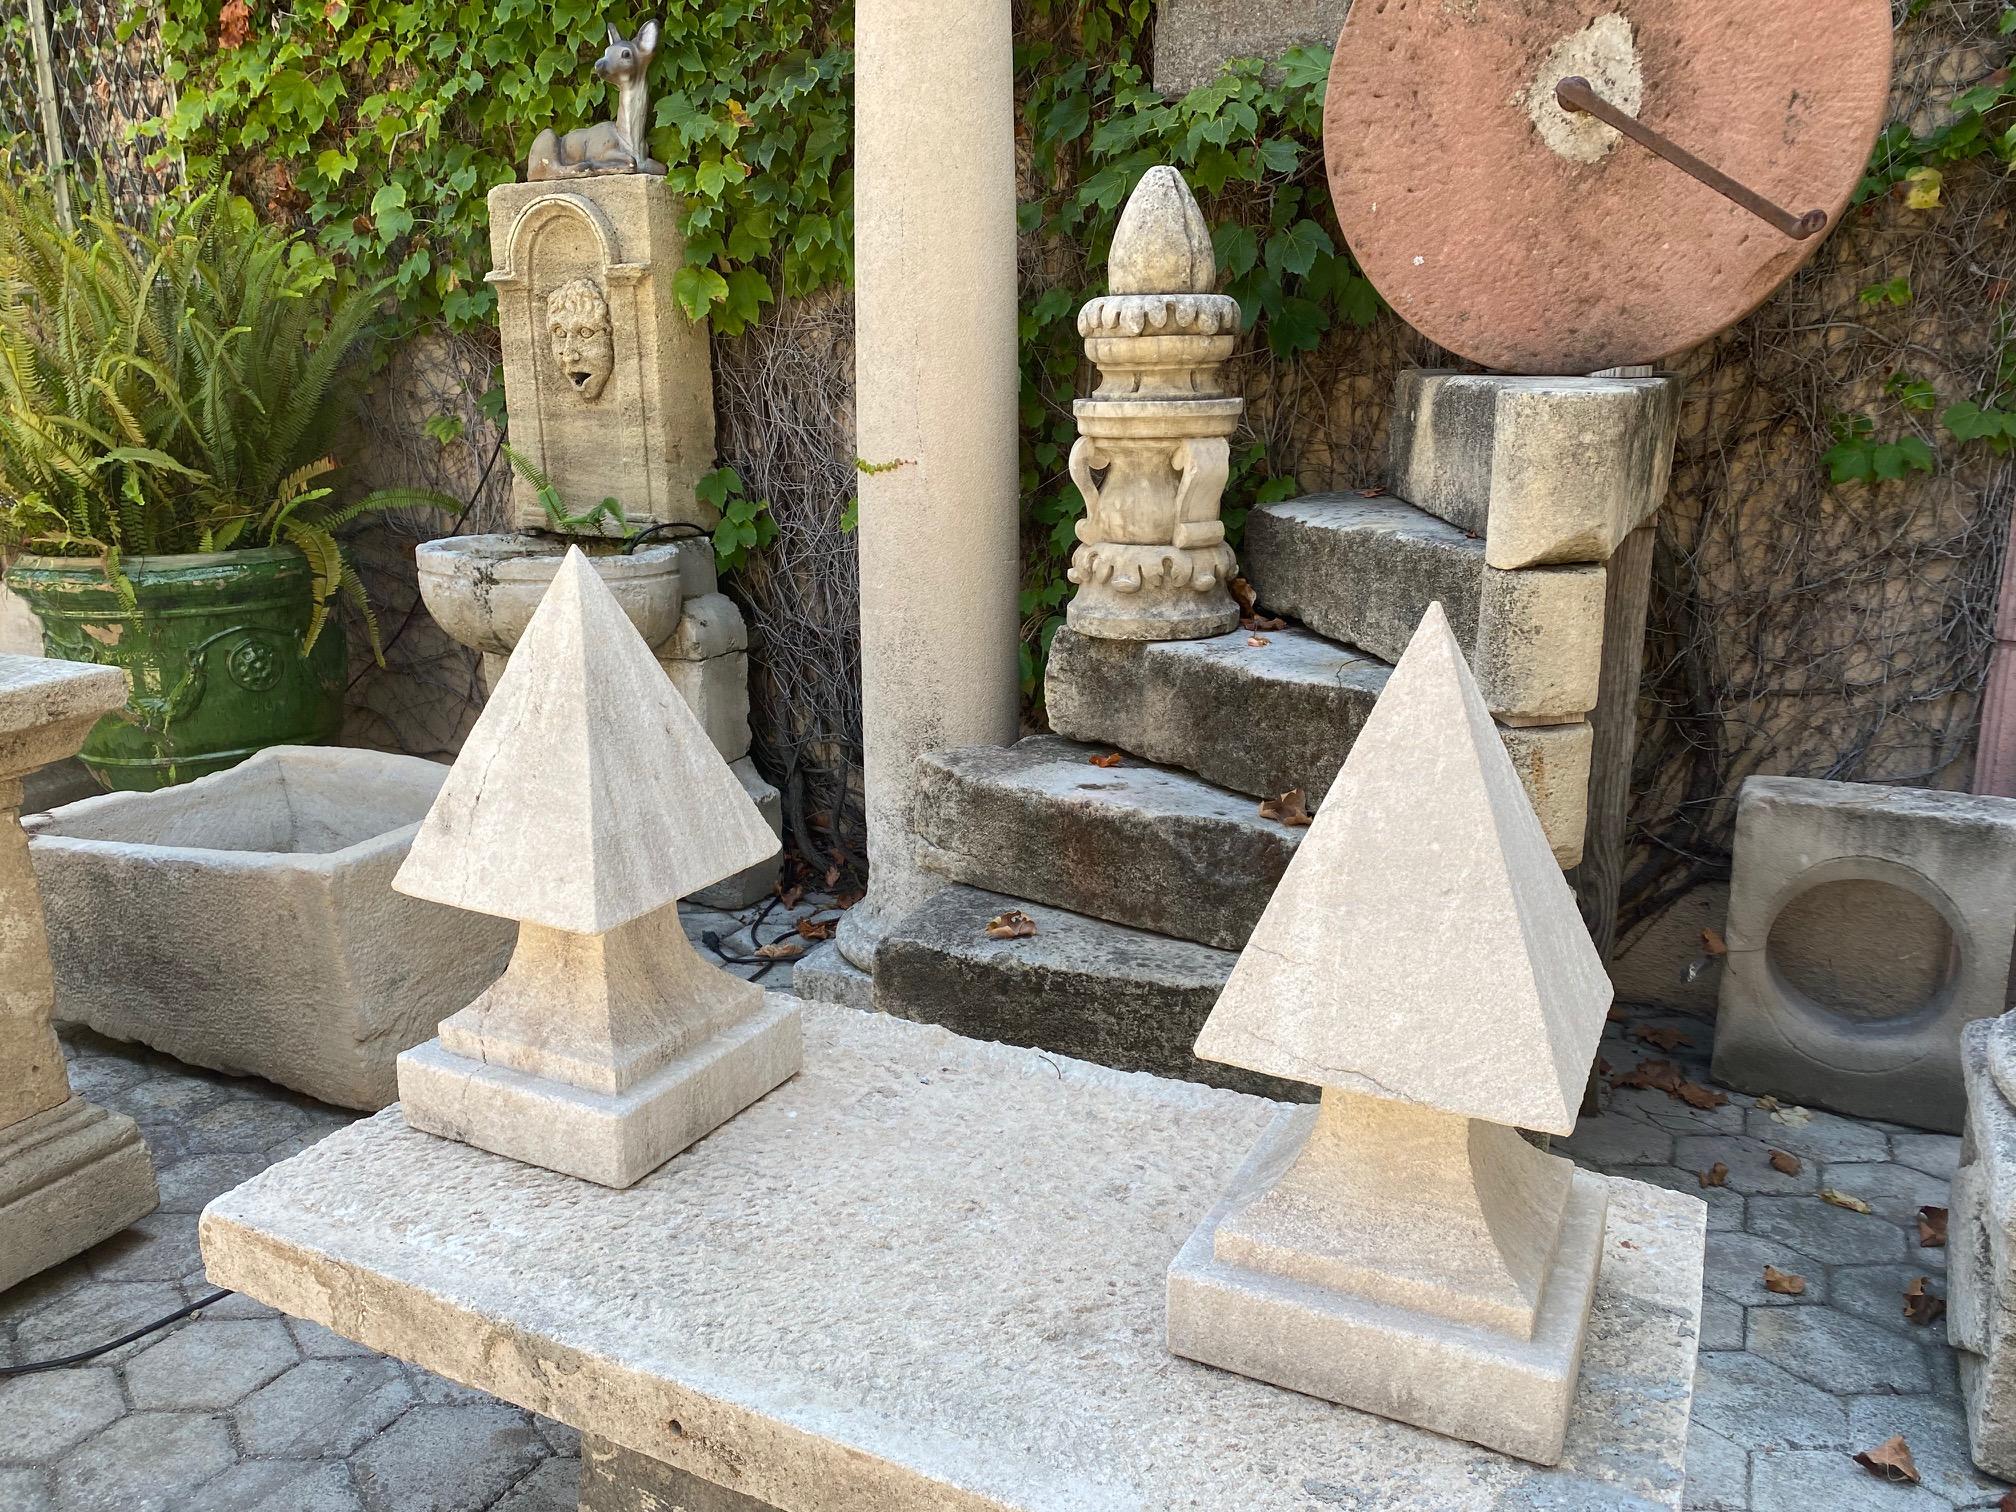 Pair of late 18th century pyramid shape beautiful hand carved stone finials. Great patina with fantastic simple geometric lines. Architectural elements garden ornament to complement your home. Use as finials on top of your house gates pillars